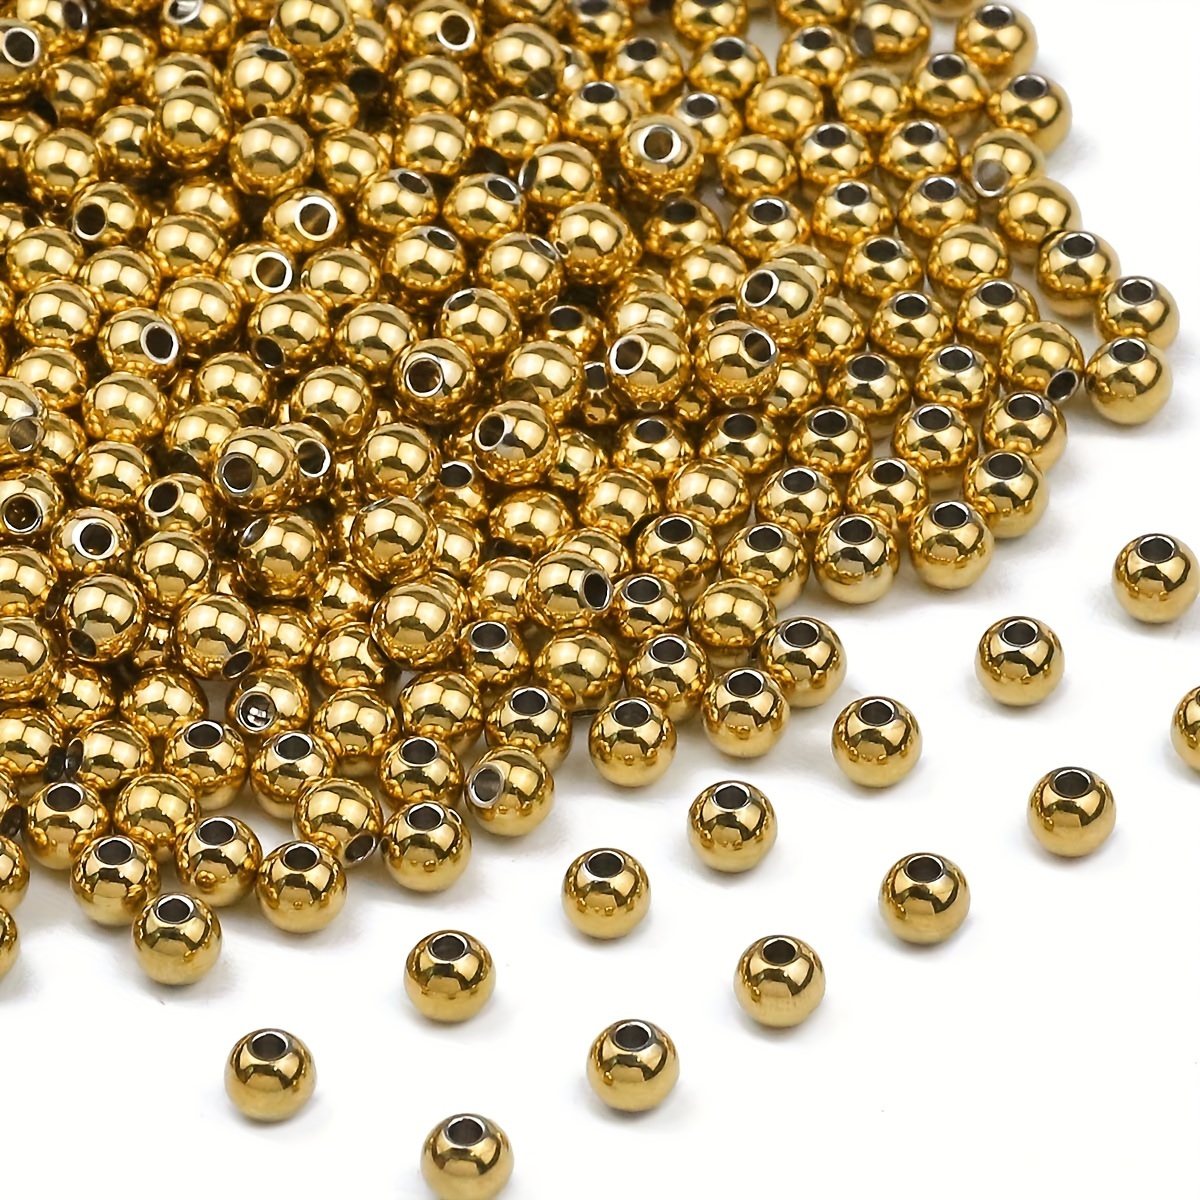 

50-20pcs 3-8mm Golden Stainless Steel Smooth Precision Loose Beads For Jewelry Making Diy Special Bracelet Necklace Earrings Handmade Craft Supplies